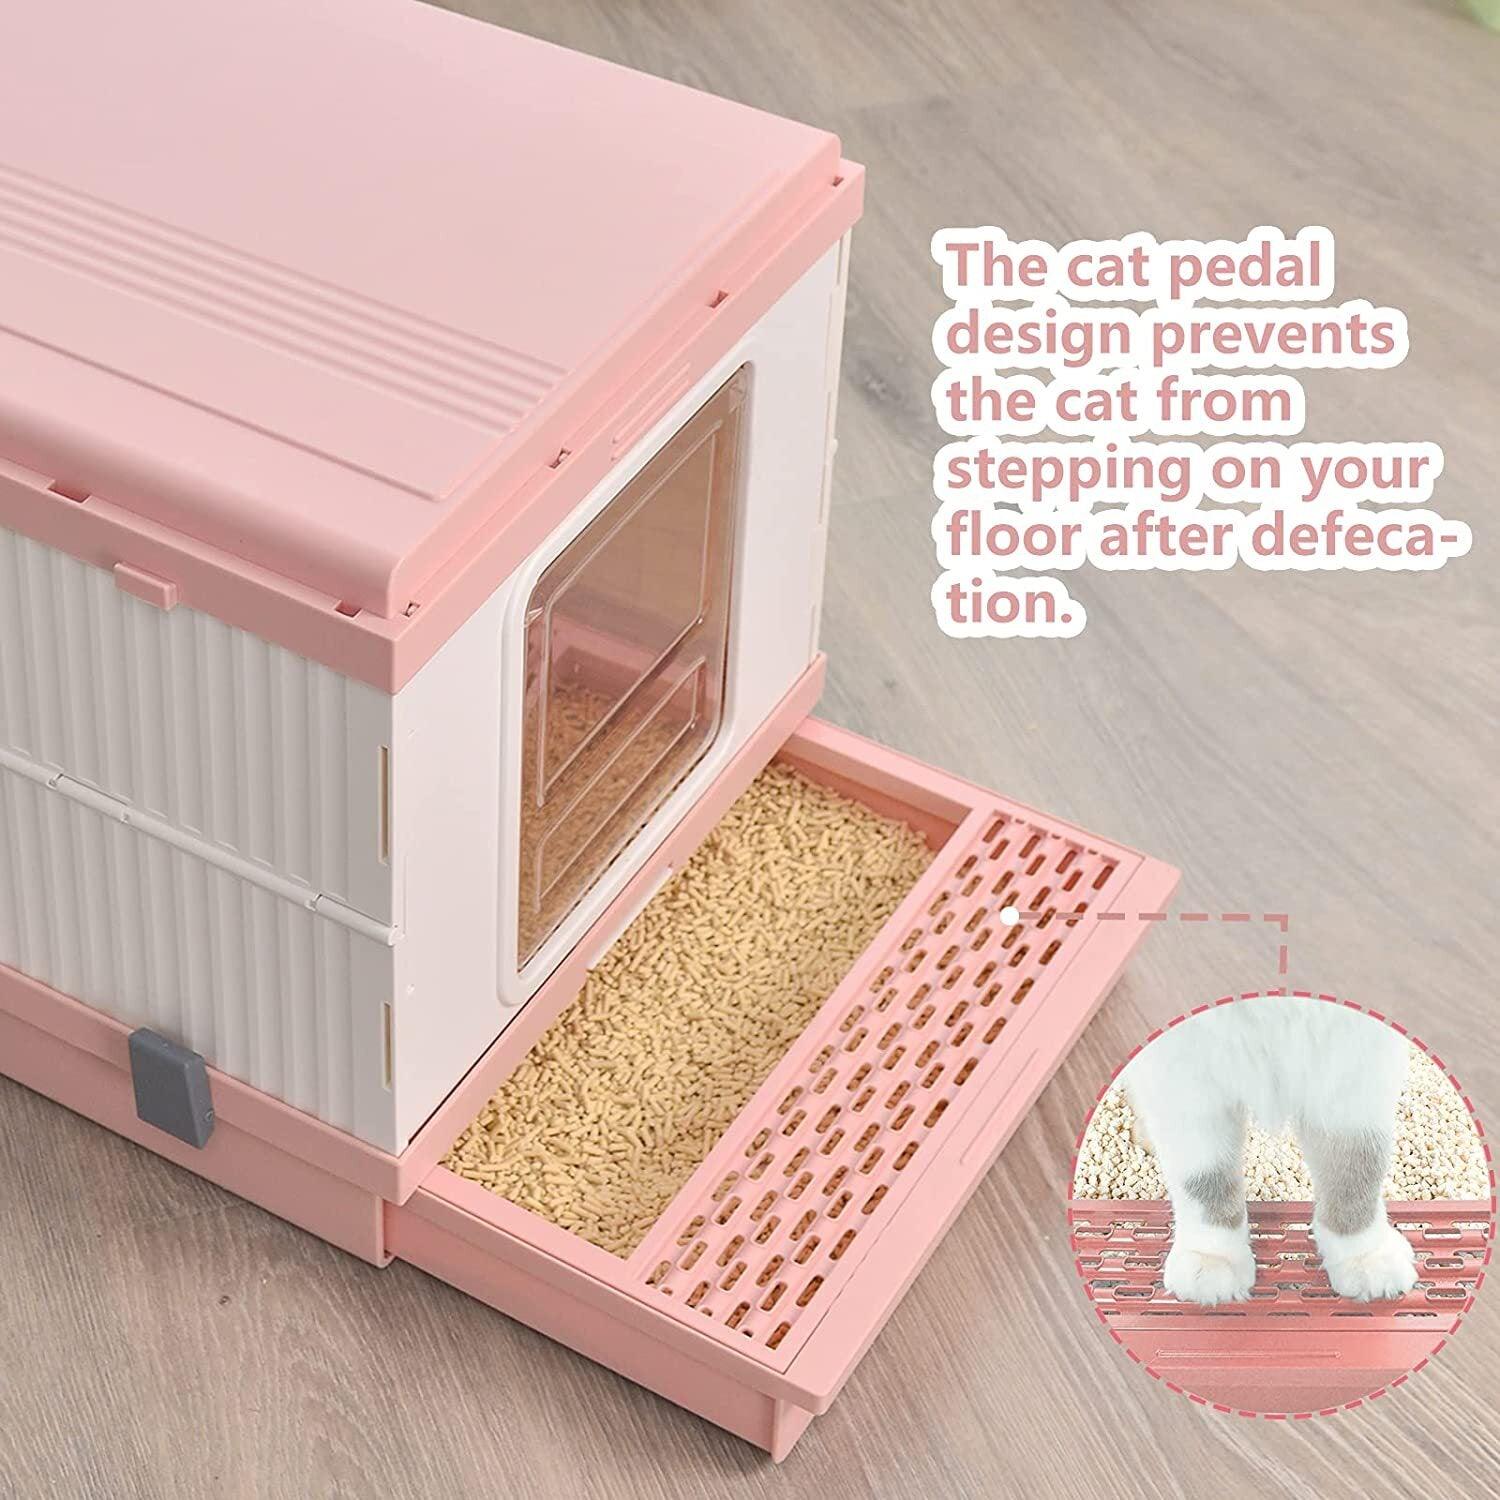 XL Portable Cat Toilet Litter Box Tray Foldable House with Handle and Scoop Pink